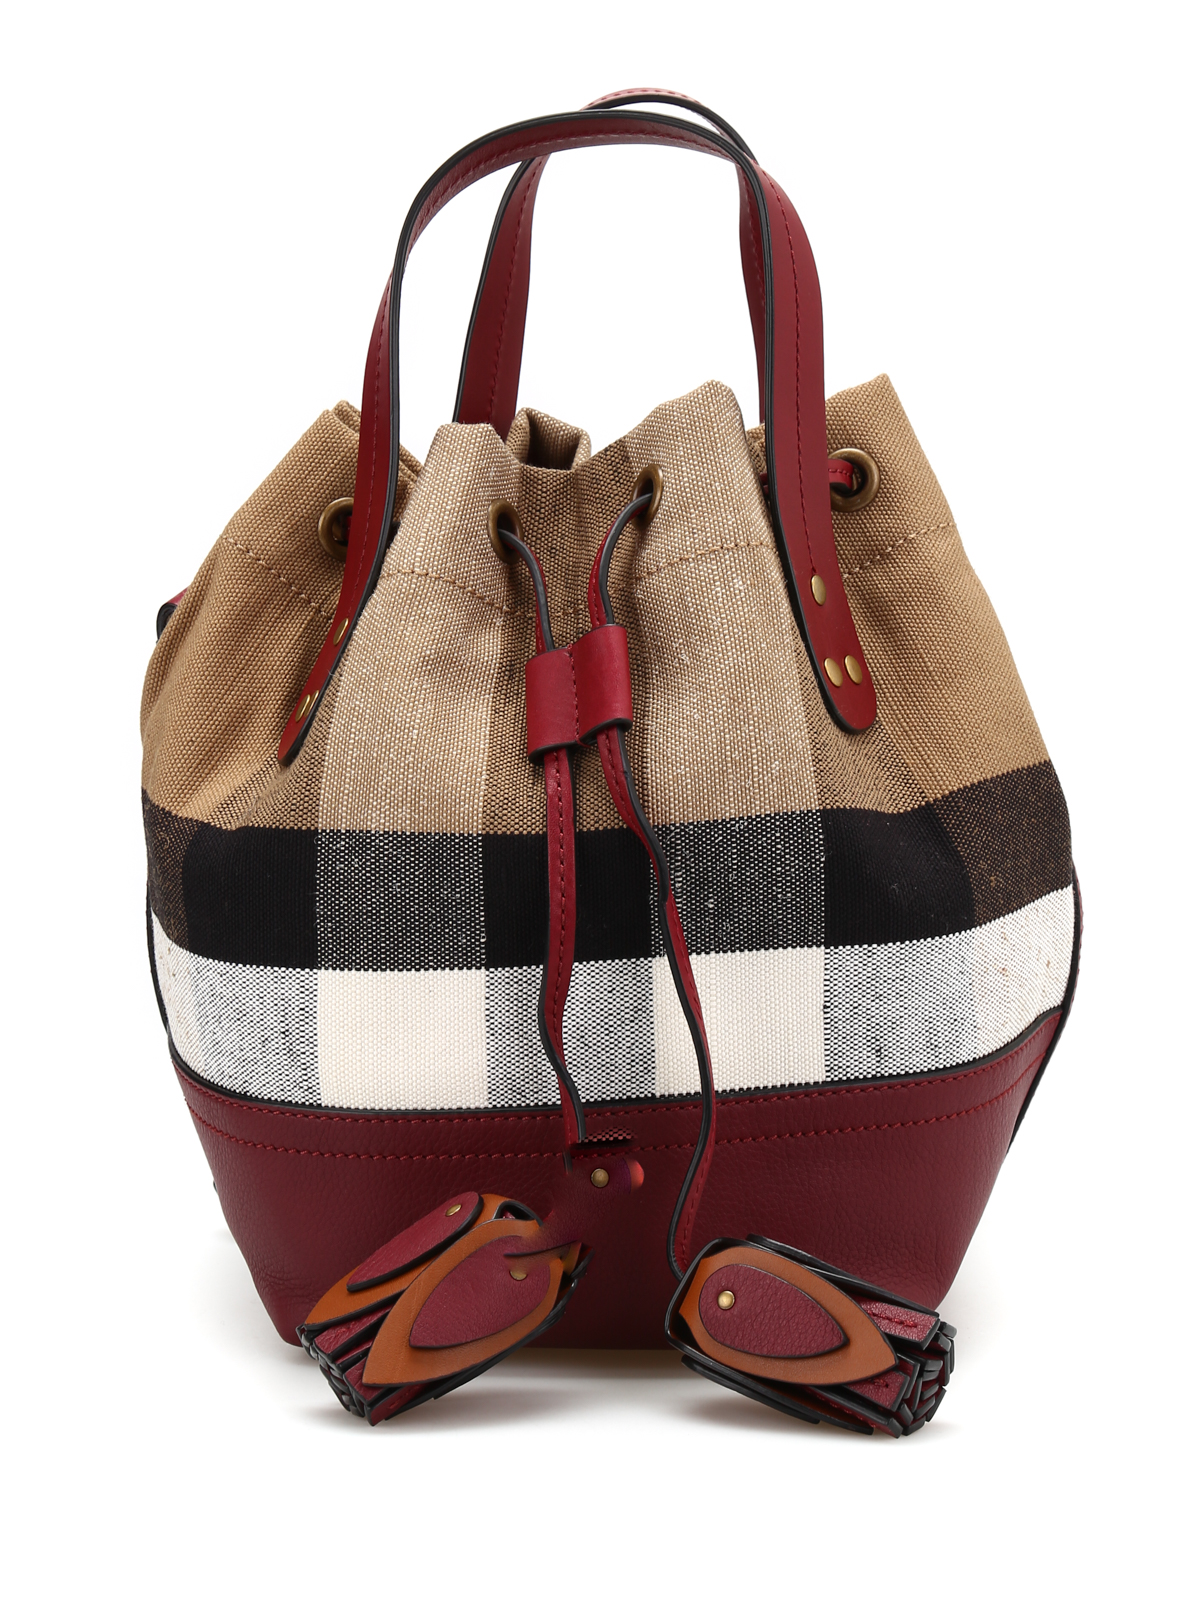 burberry bucket bag price, Burberry Clothing & Bag - Up to 40% - 70% off Discount sale